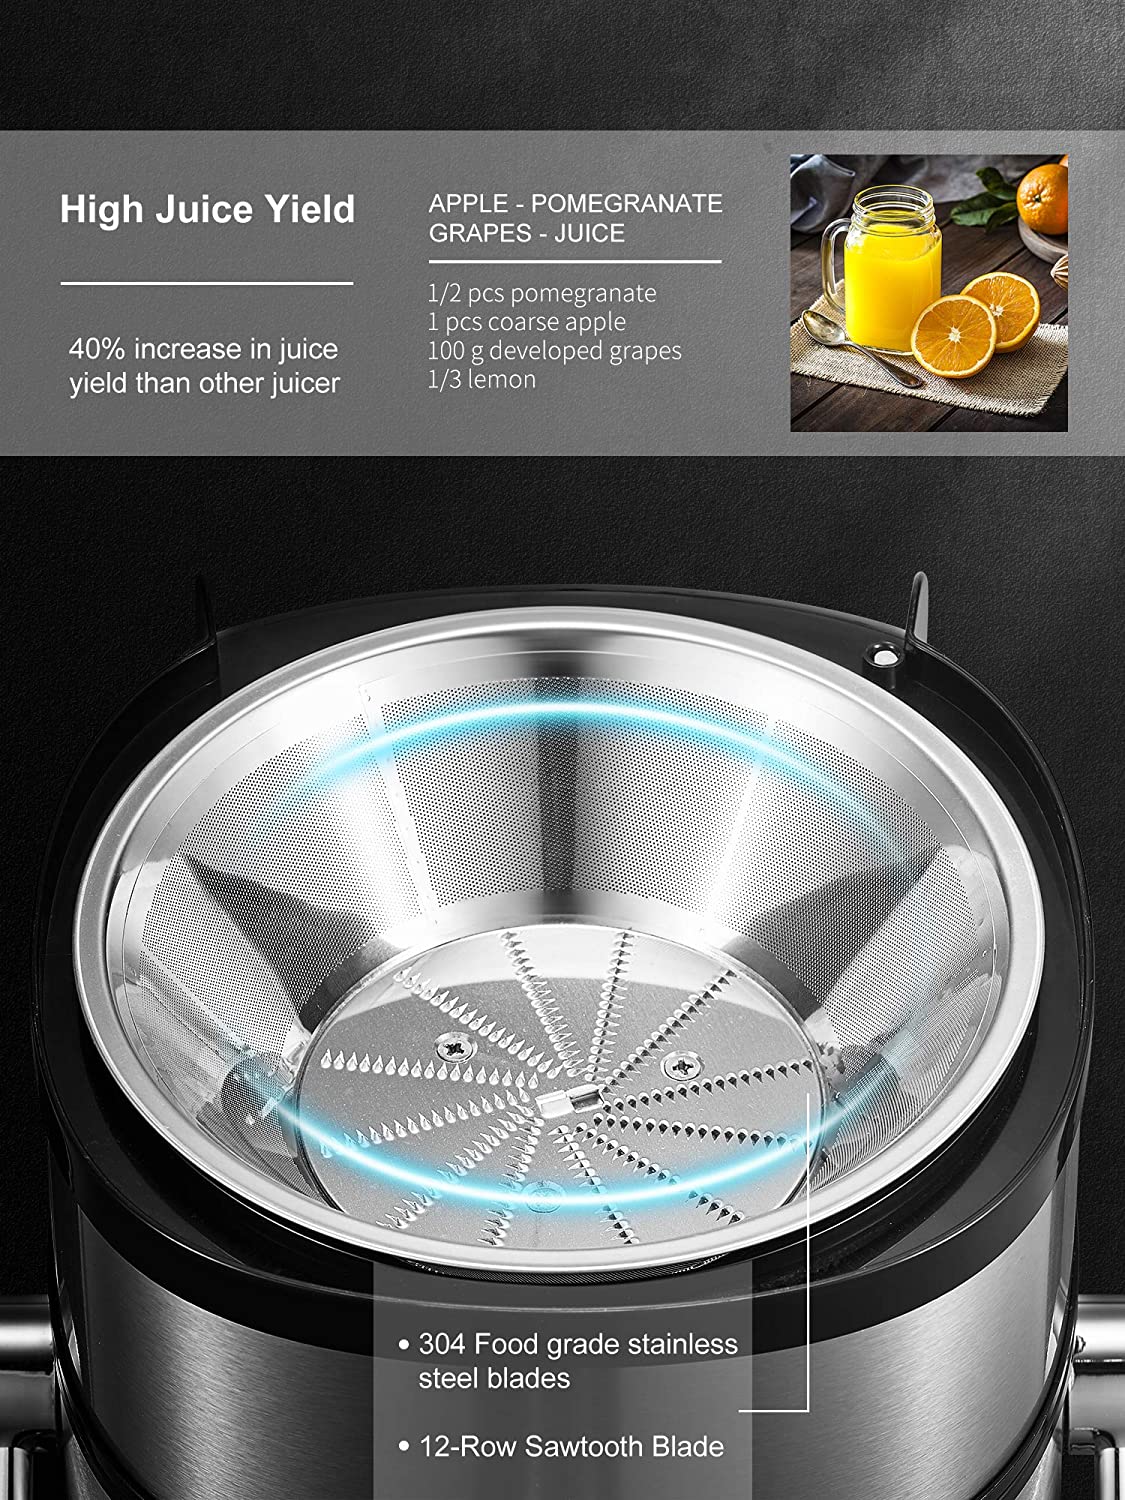 AICOOK | Centrifugal Juicer, 800W Juice Extractor with 5 Settings, Wide Mouth 3" Feed Chute for Whole Fruit Vegetable Juicing Machine, Easy Clean and Assemble, Anti-Drip, Gigh Juice Yield